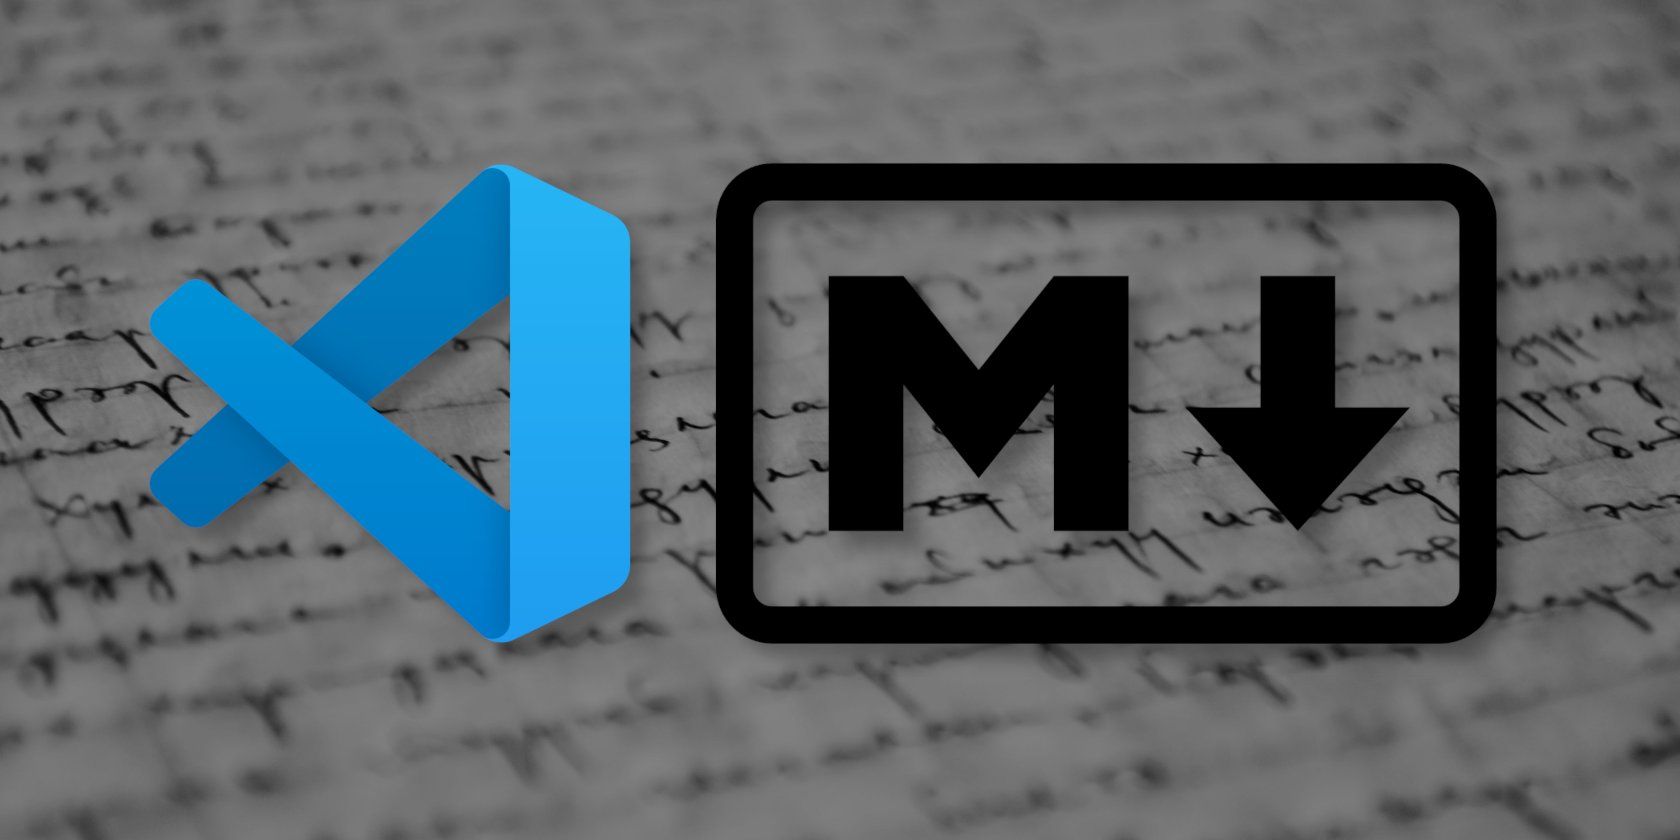 The VSCode and Markdown logos with blurry handwritten text in the background.